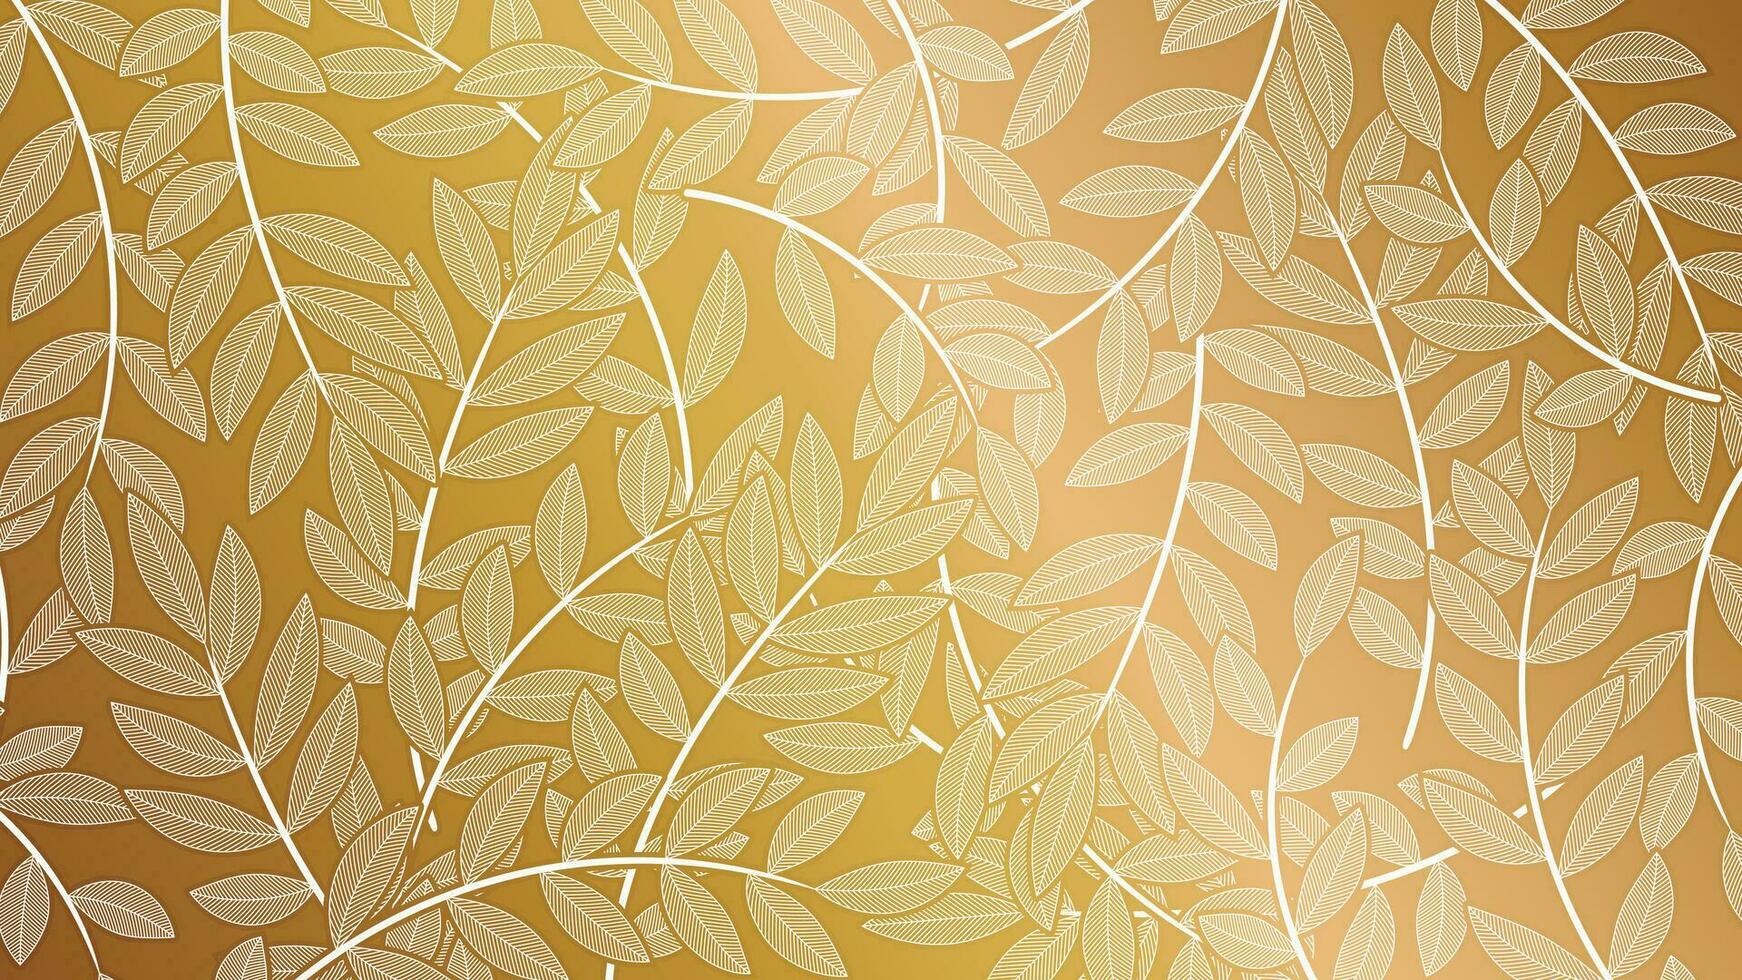 Abstract gold foliage line art vector background. Leaf wallpaper of tropical leaves, leaf branch, plants in hand drawn pattern. Botanical jungle illustrated for banner, prints, decoration, fabric.